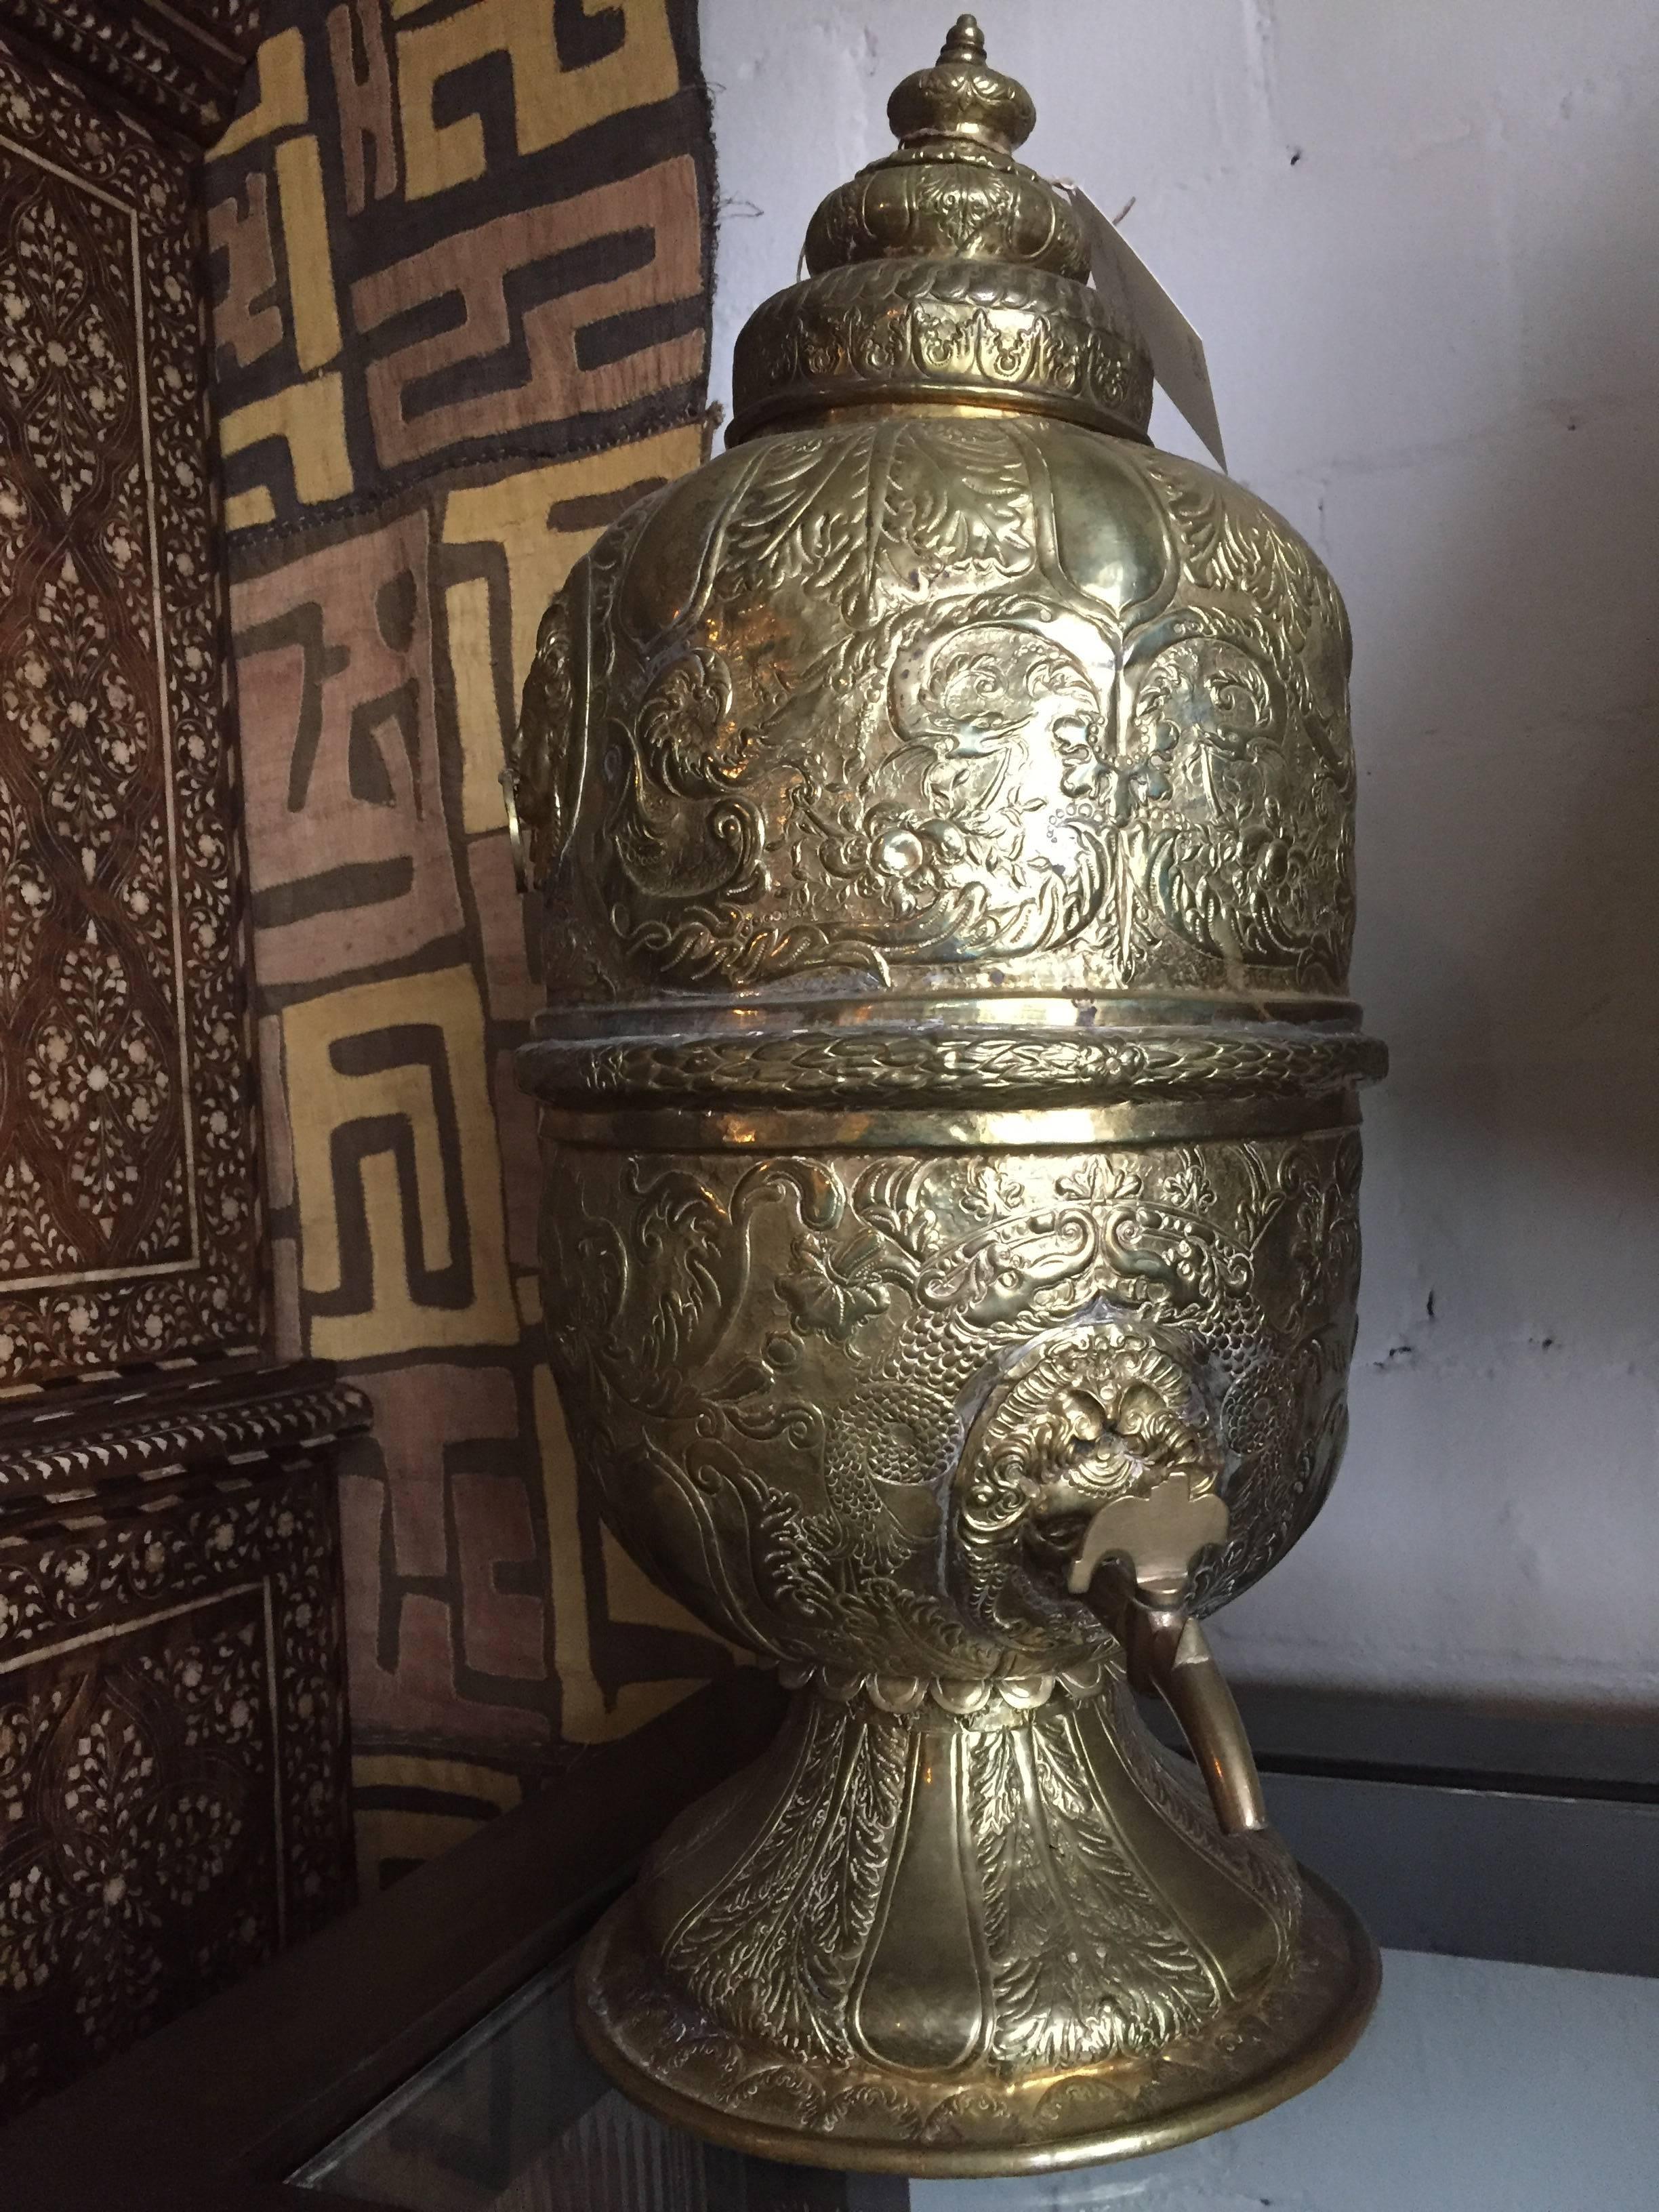 Brass repousse samovar. Originally used for tea or coffee. All in working order.